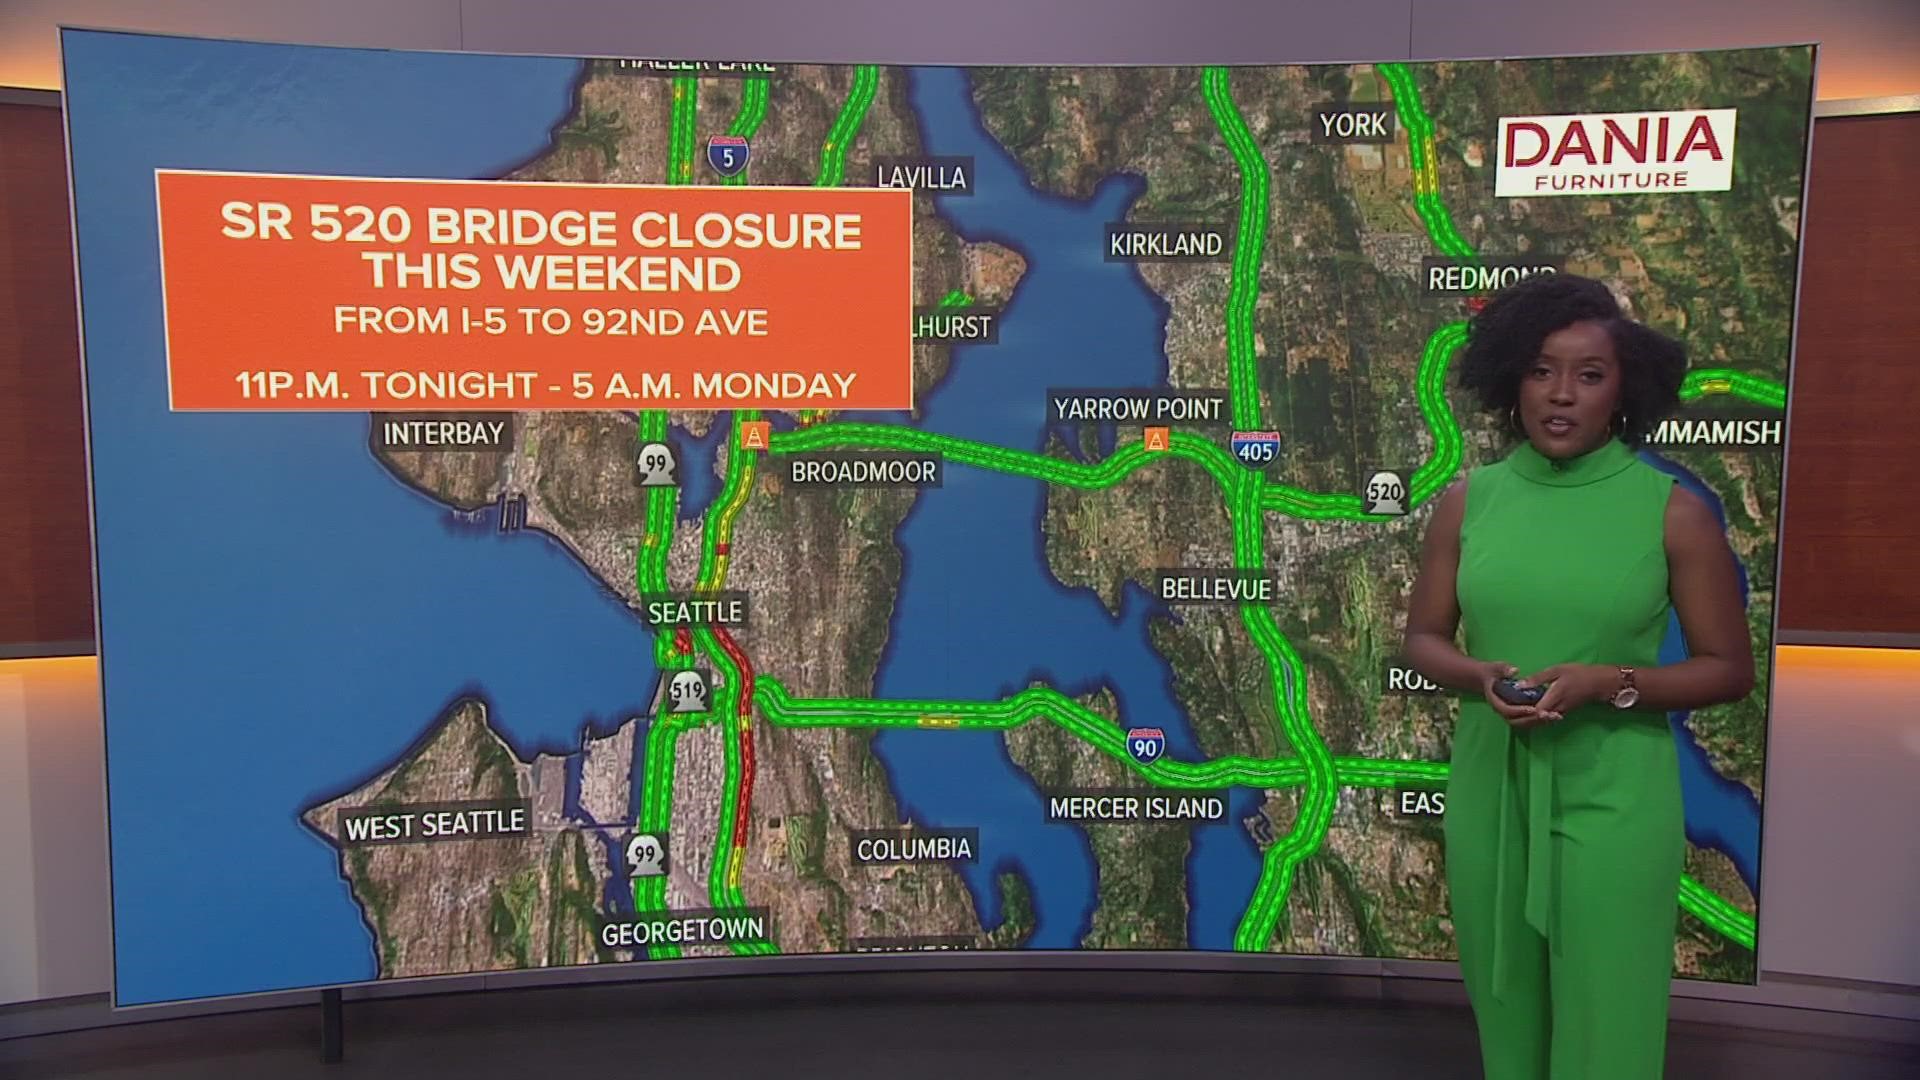 The closures will begin at 11 p.m. on Friday and end at 5 a.m. on Monday.